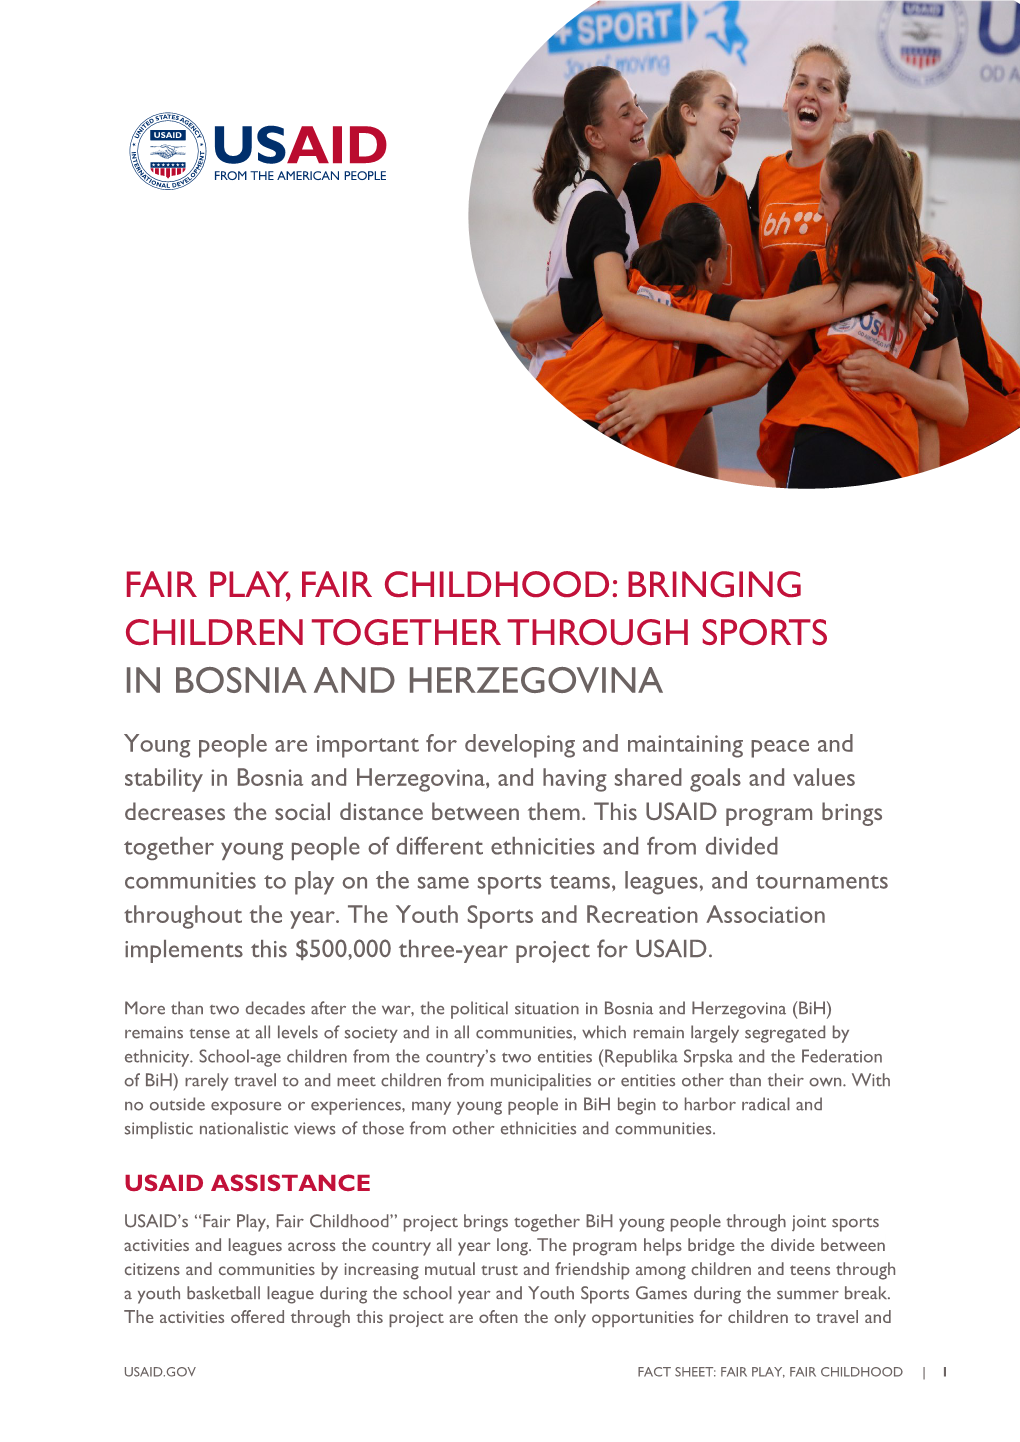 Fair Play, Fair Childhood: Bringing Children Together Through Sports in Bosnia and Herzegovina